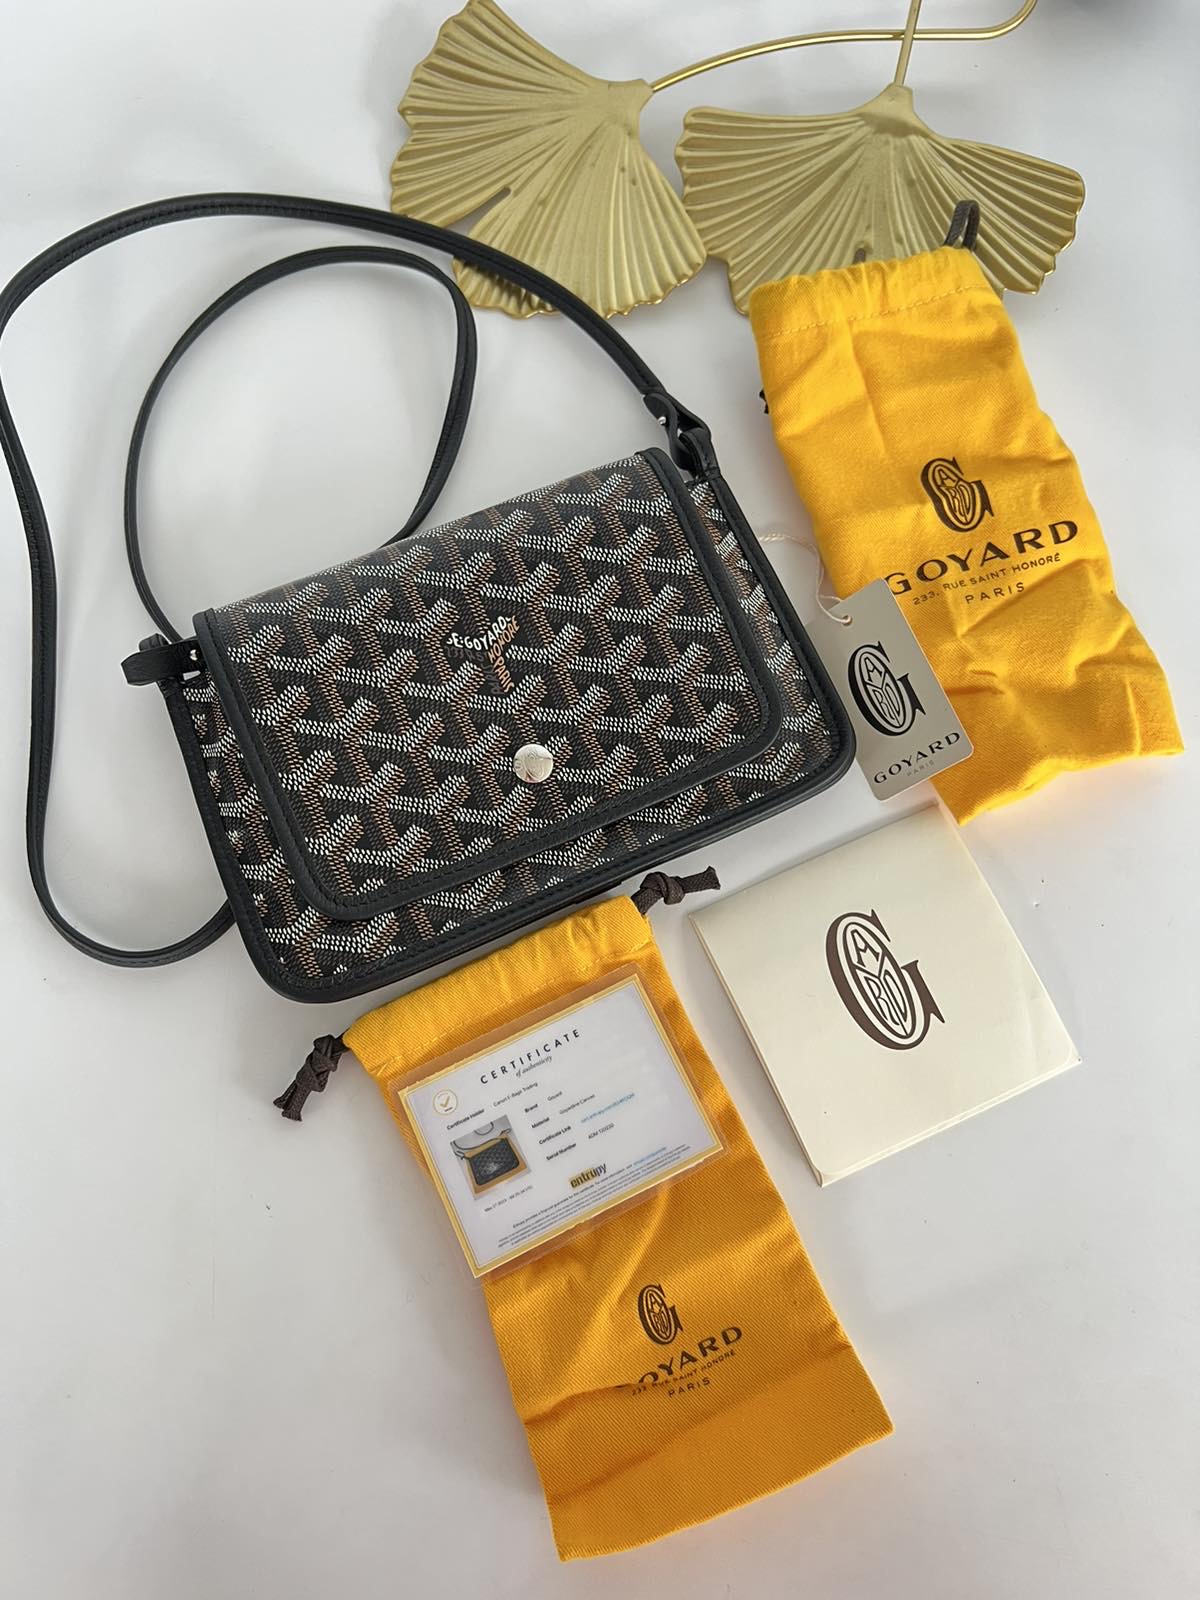 Goyard Black Plumet Wallet Clutch/Crossbody Bag. Made in France. With care  card, dustbag & certificate of authenticity from ENTRUPY ❤️ - Canon E-Bags  Prime